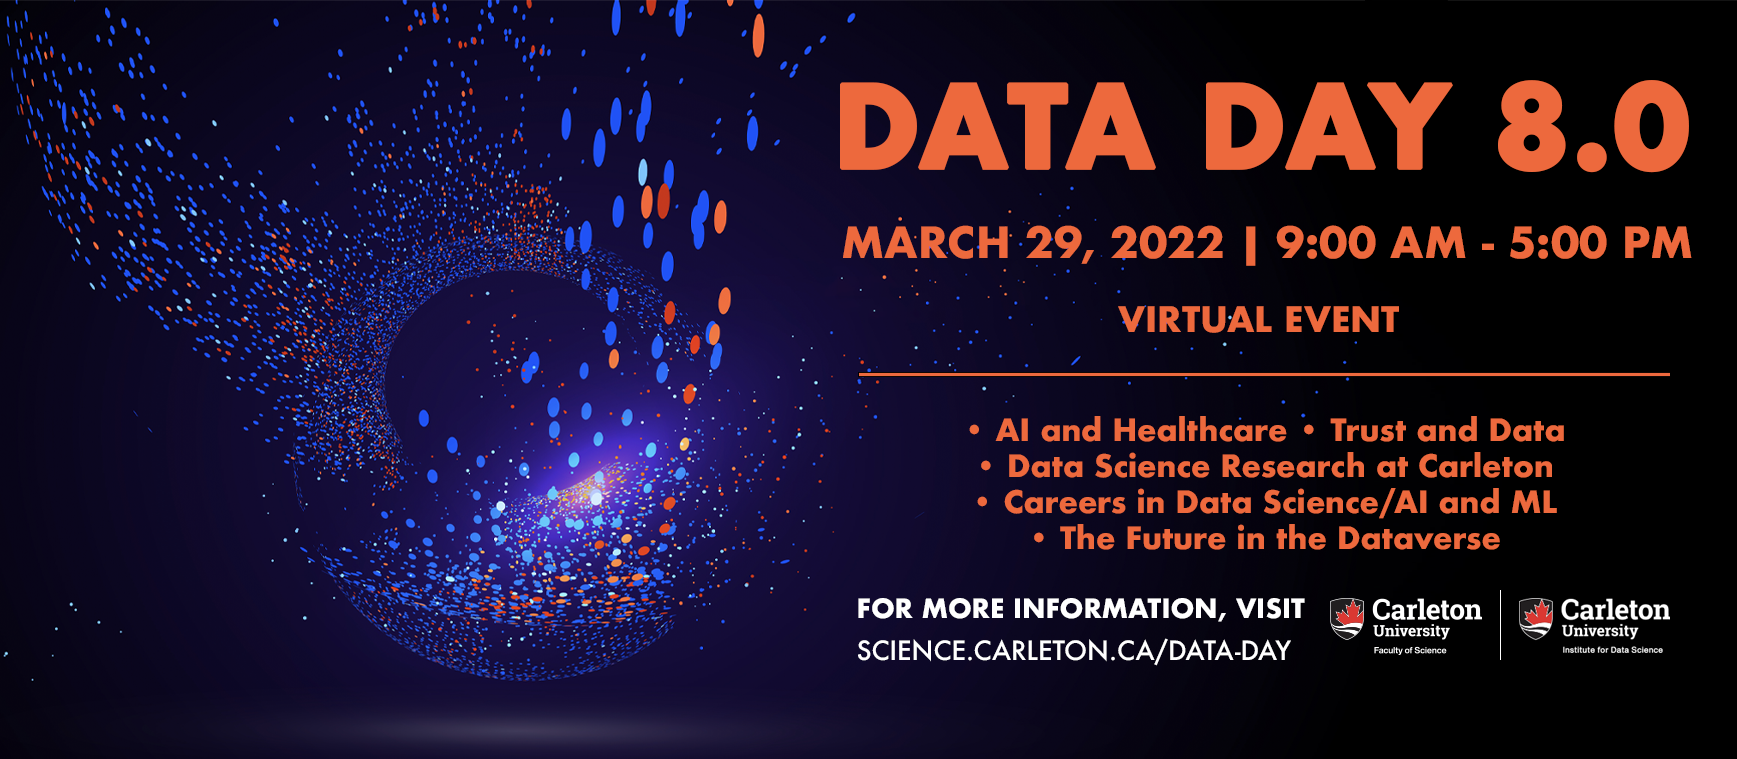 Image of Data Day promo poster 